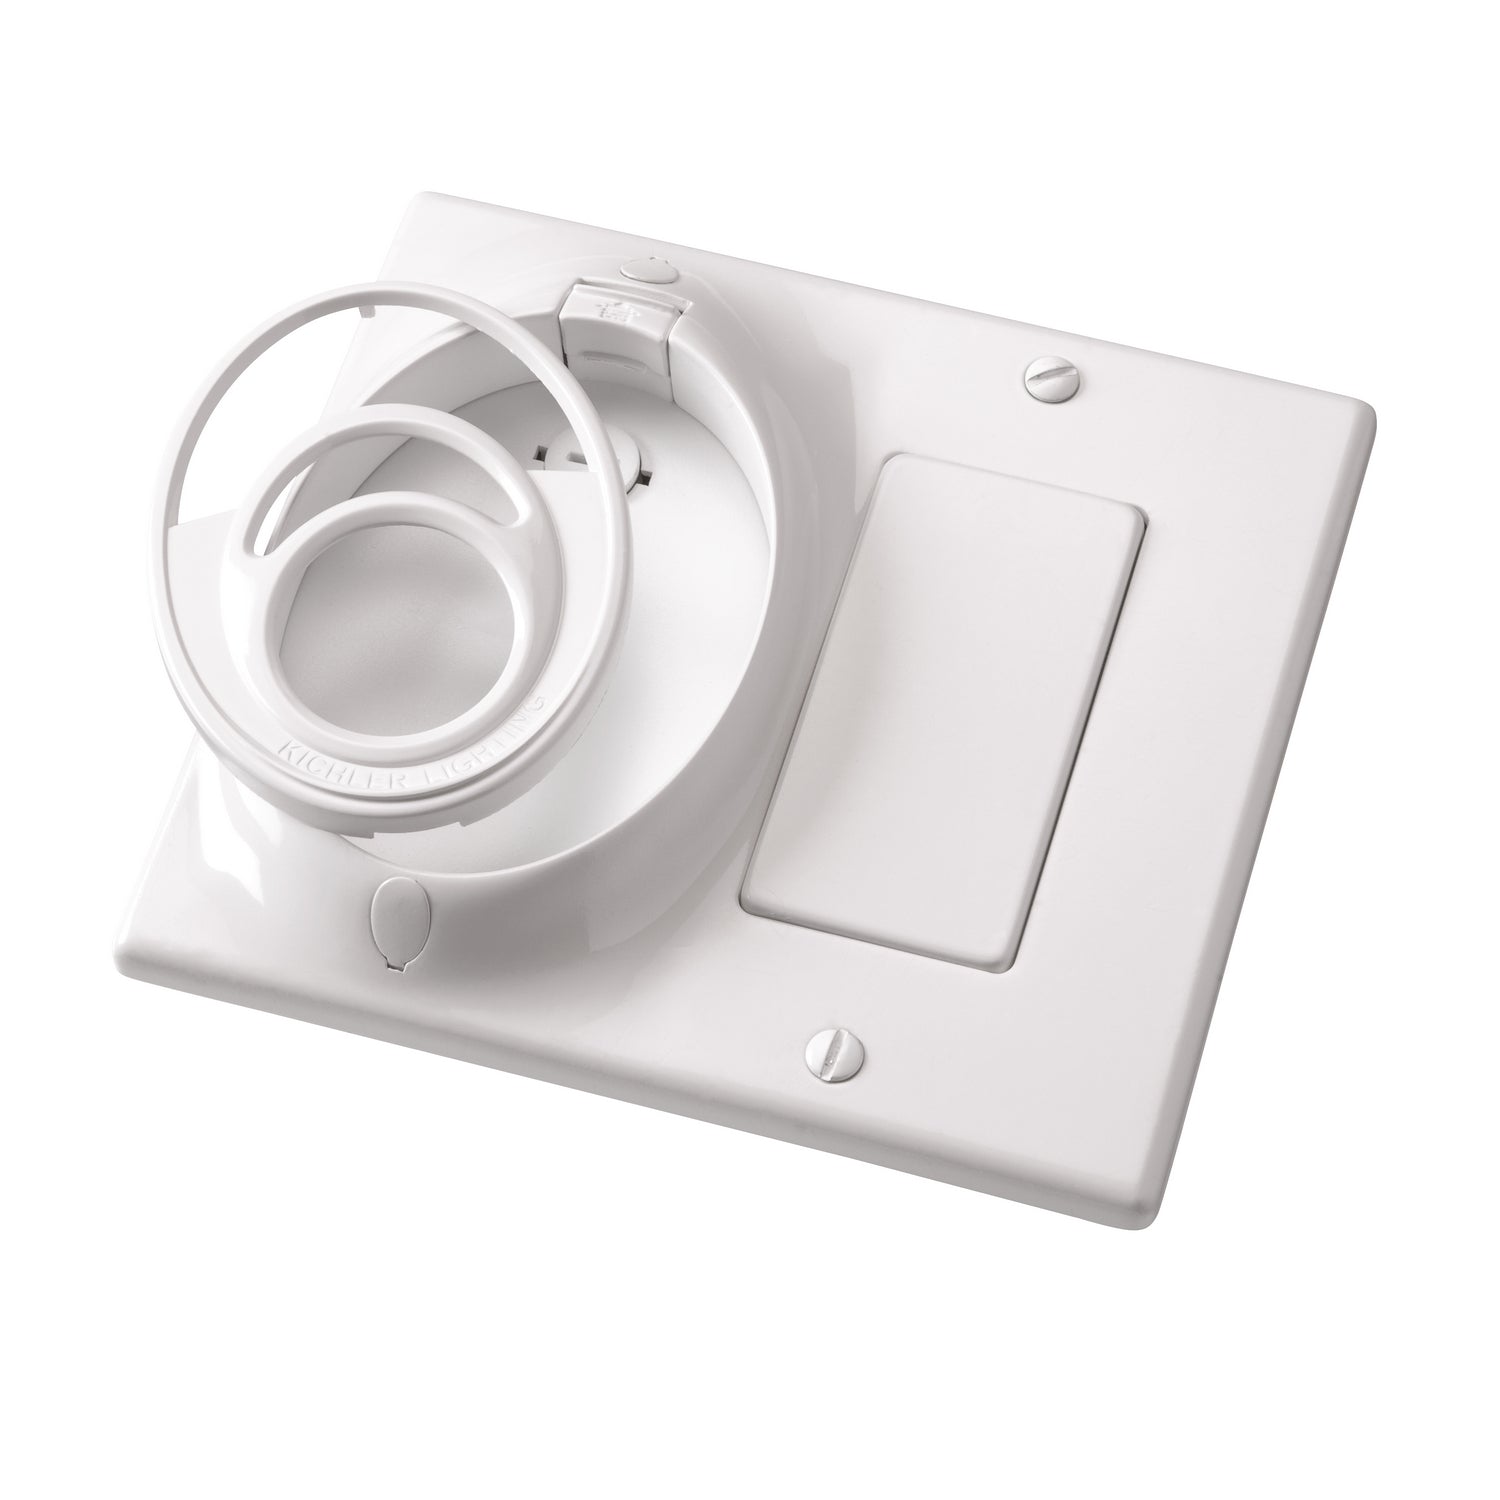 Kichler Canada - Dual Gang CoolTouch Wall Plate - Accessory - White Material (Not Painted)- Union Lighting Luminaires Decor